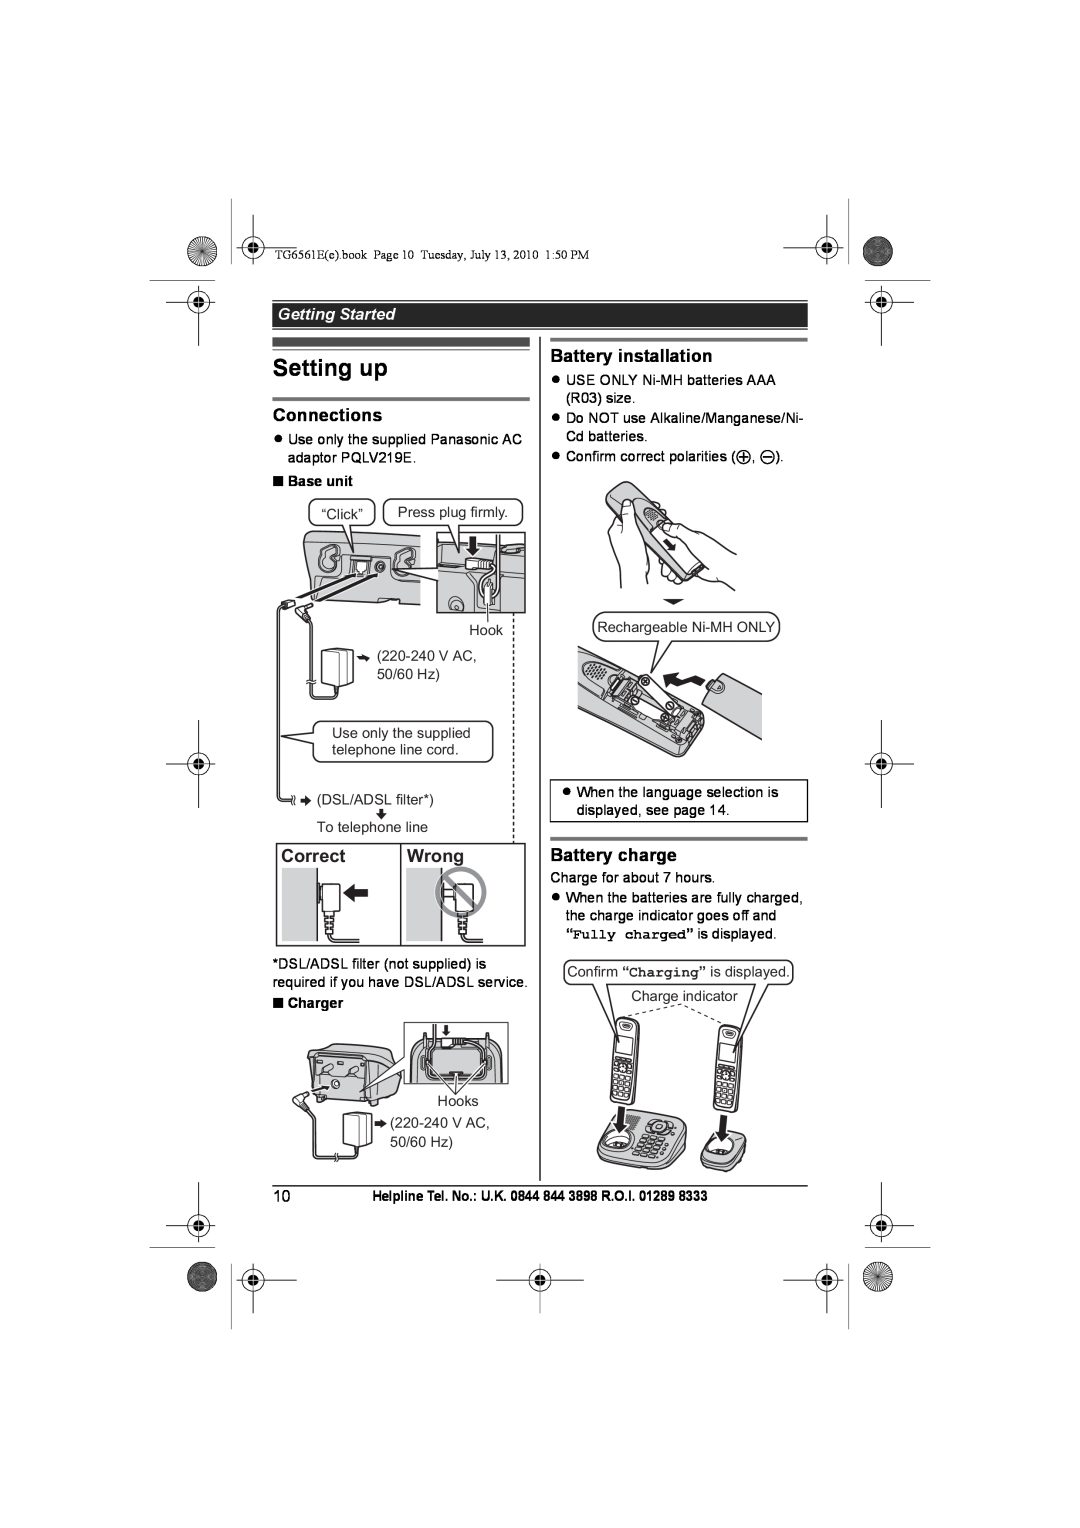 Panasonic KX-TG6562E Setting up, Connections, Correct, Wrong, Battery installation, Battery charge, Getting Started 